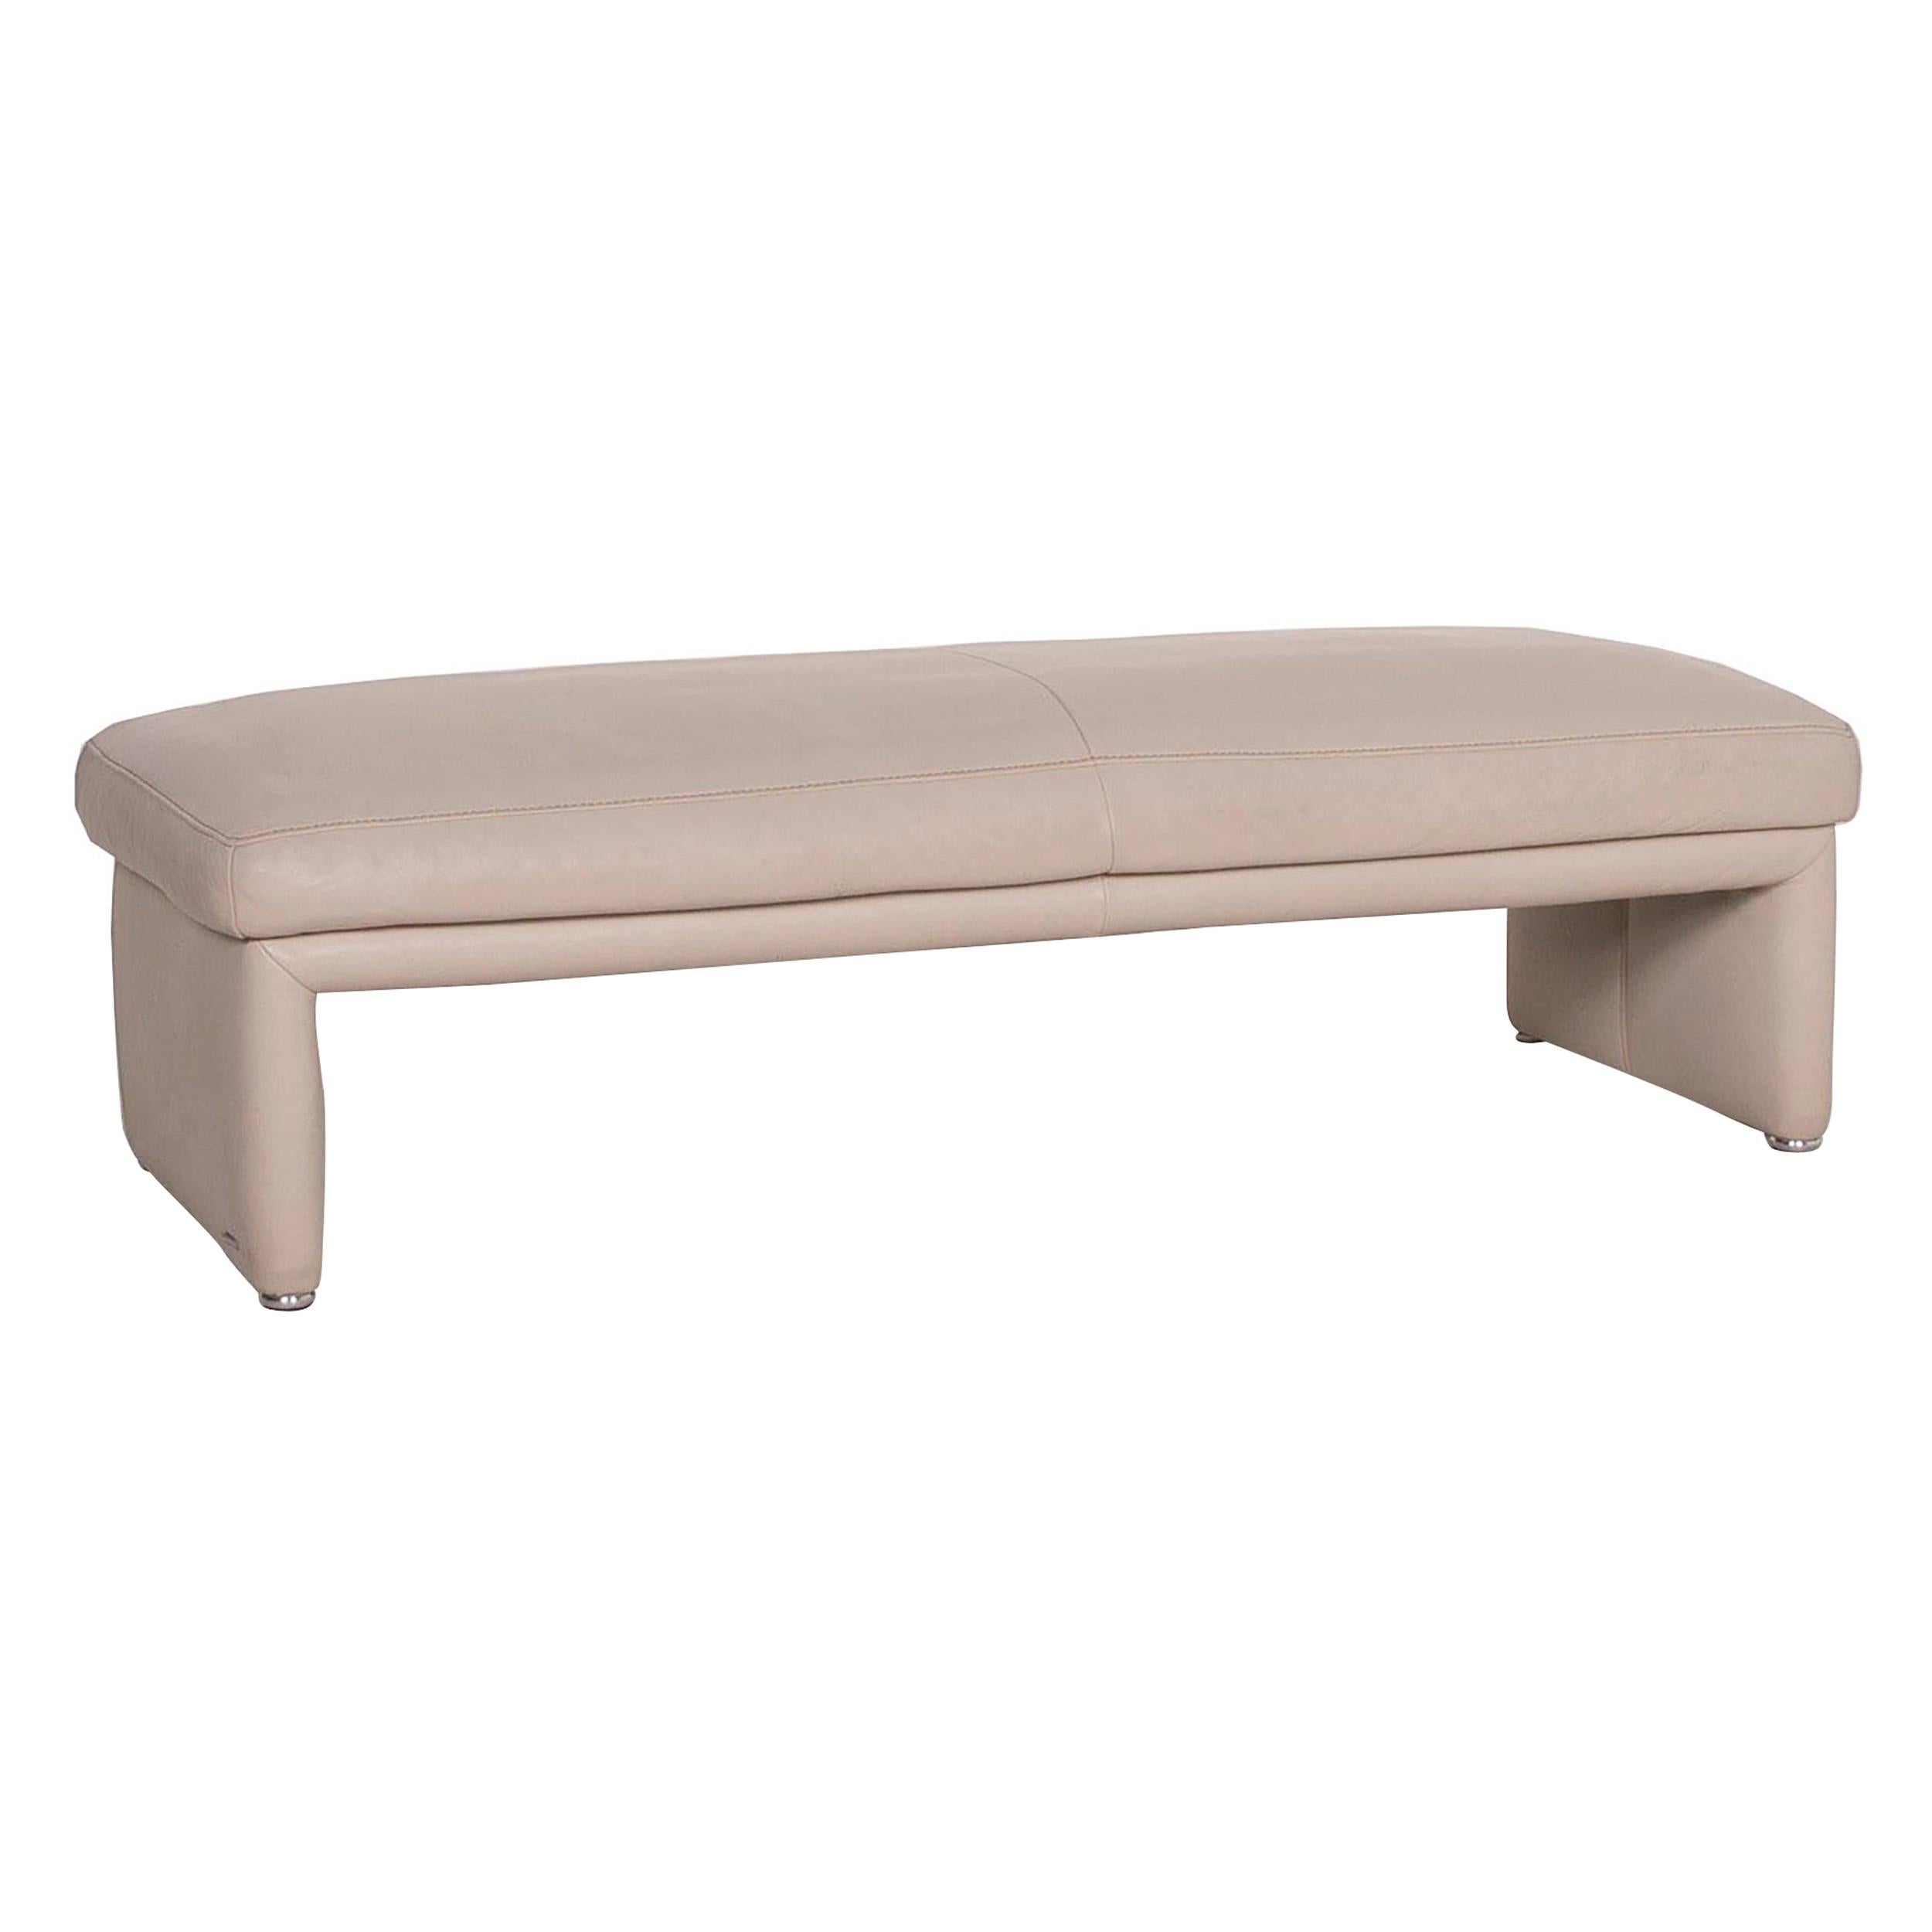 Koinor Raoul Leather Stool Cream For Sale